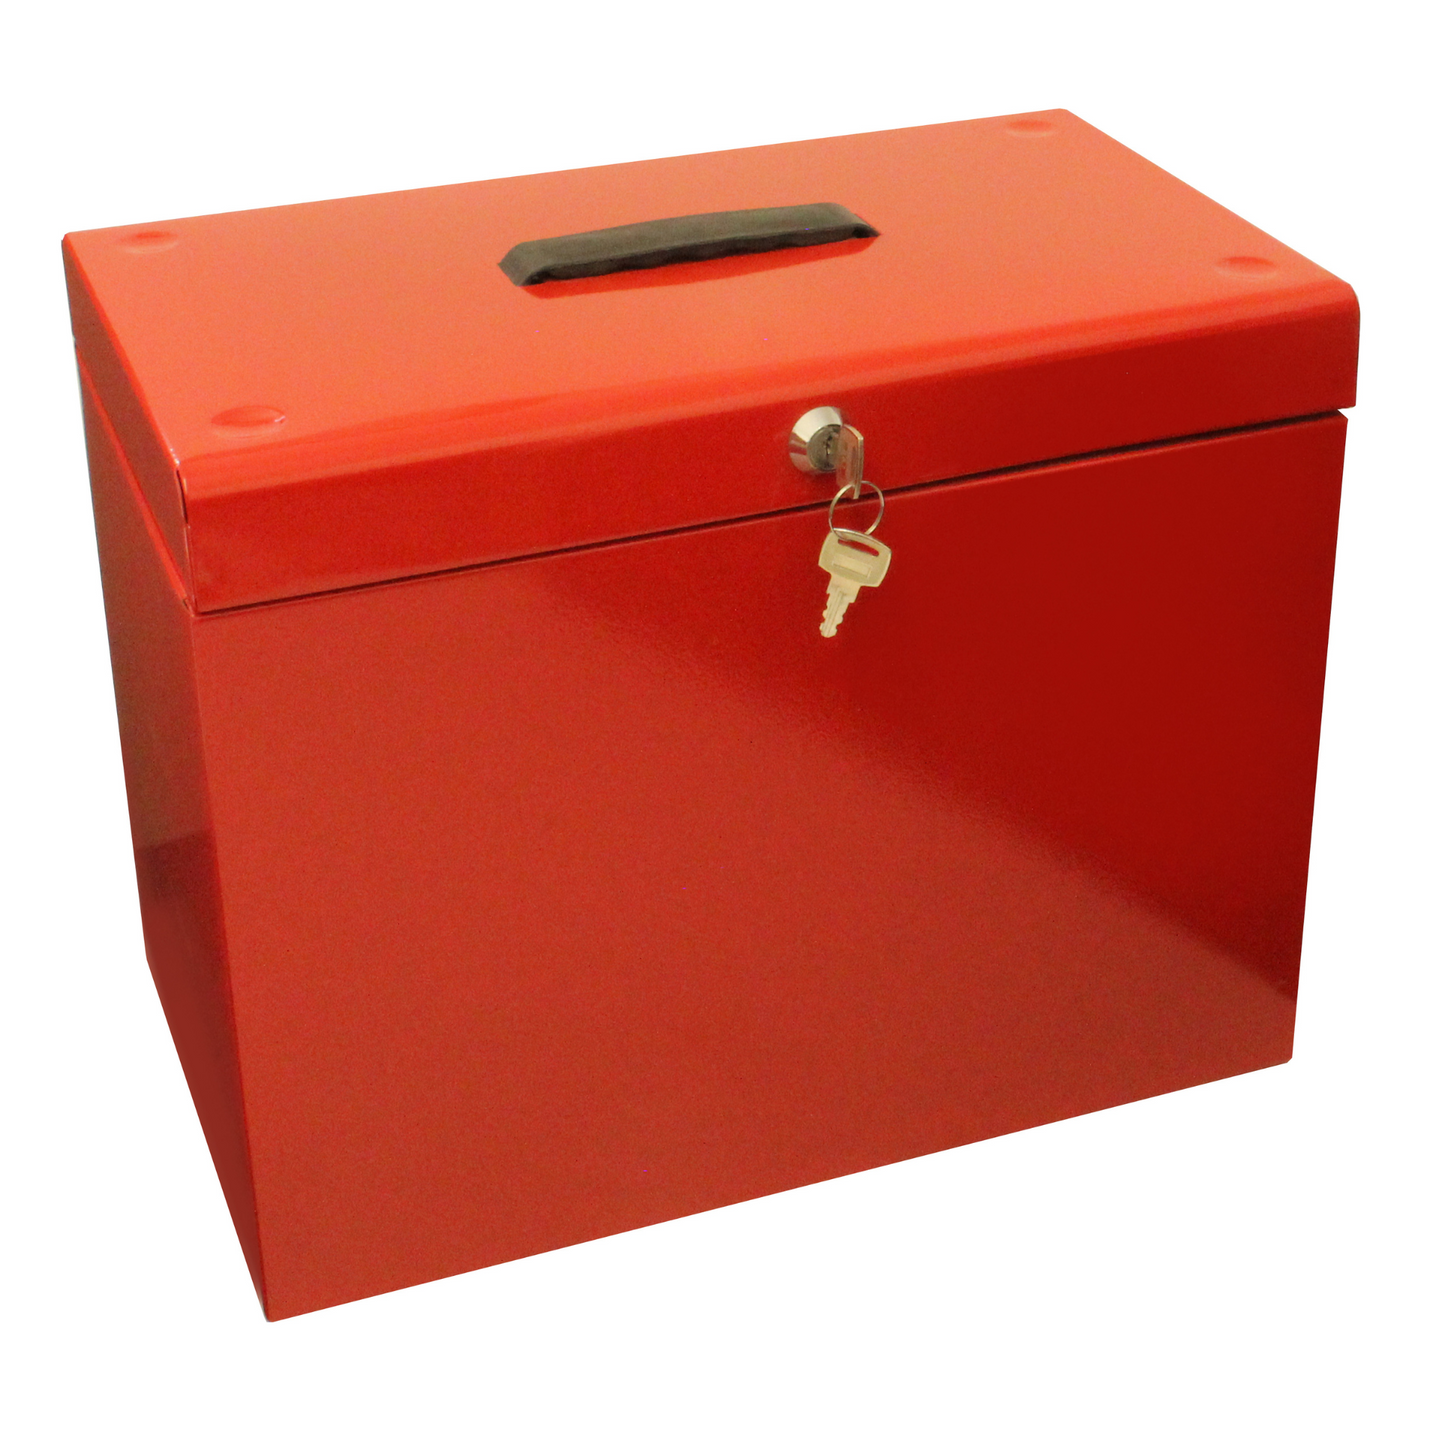 A4 Metal Home File Box with 5 Suspension Files